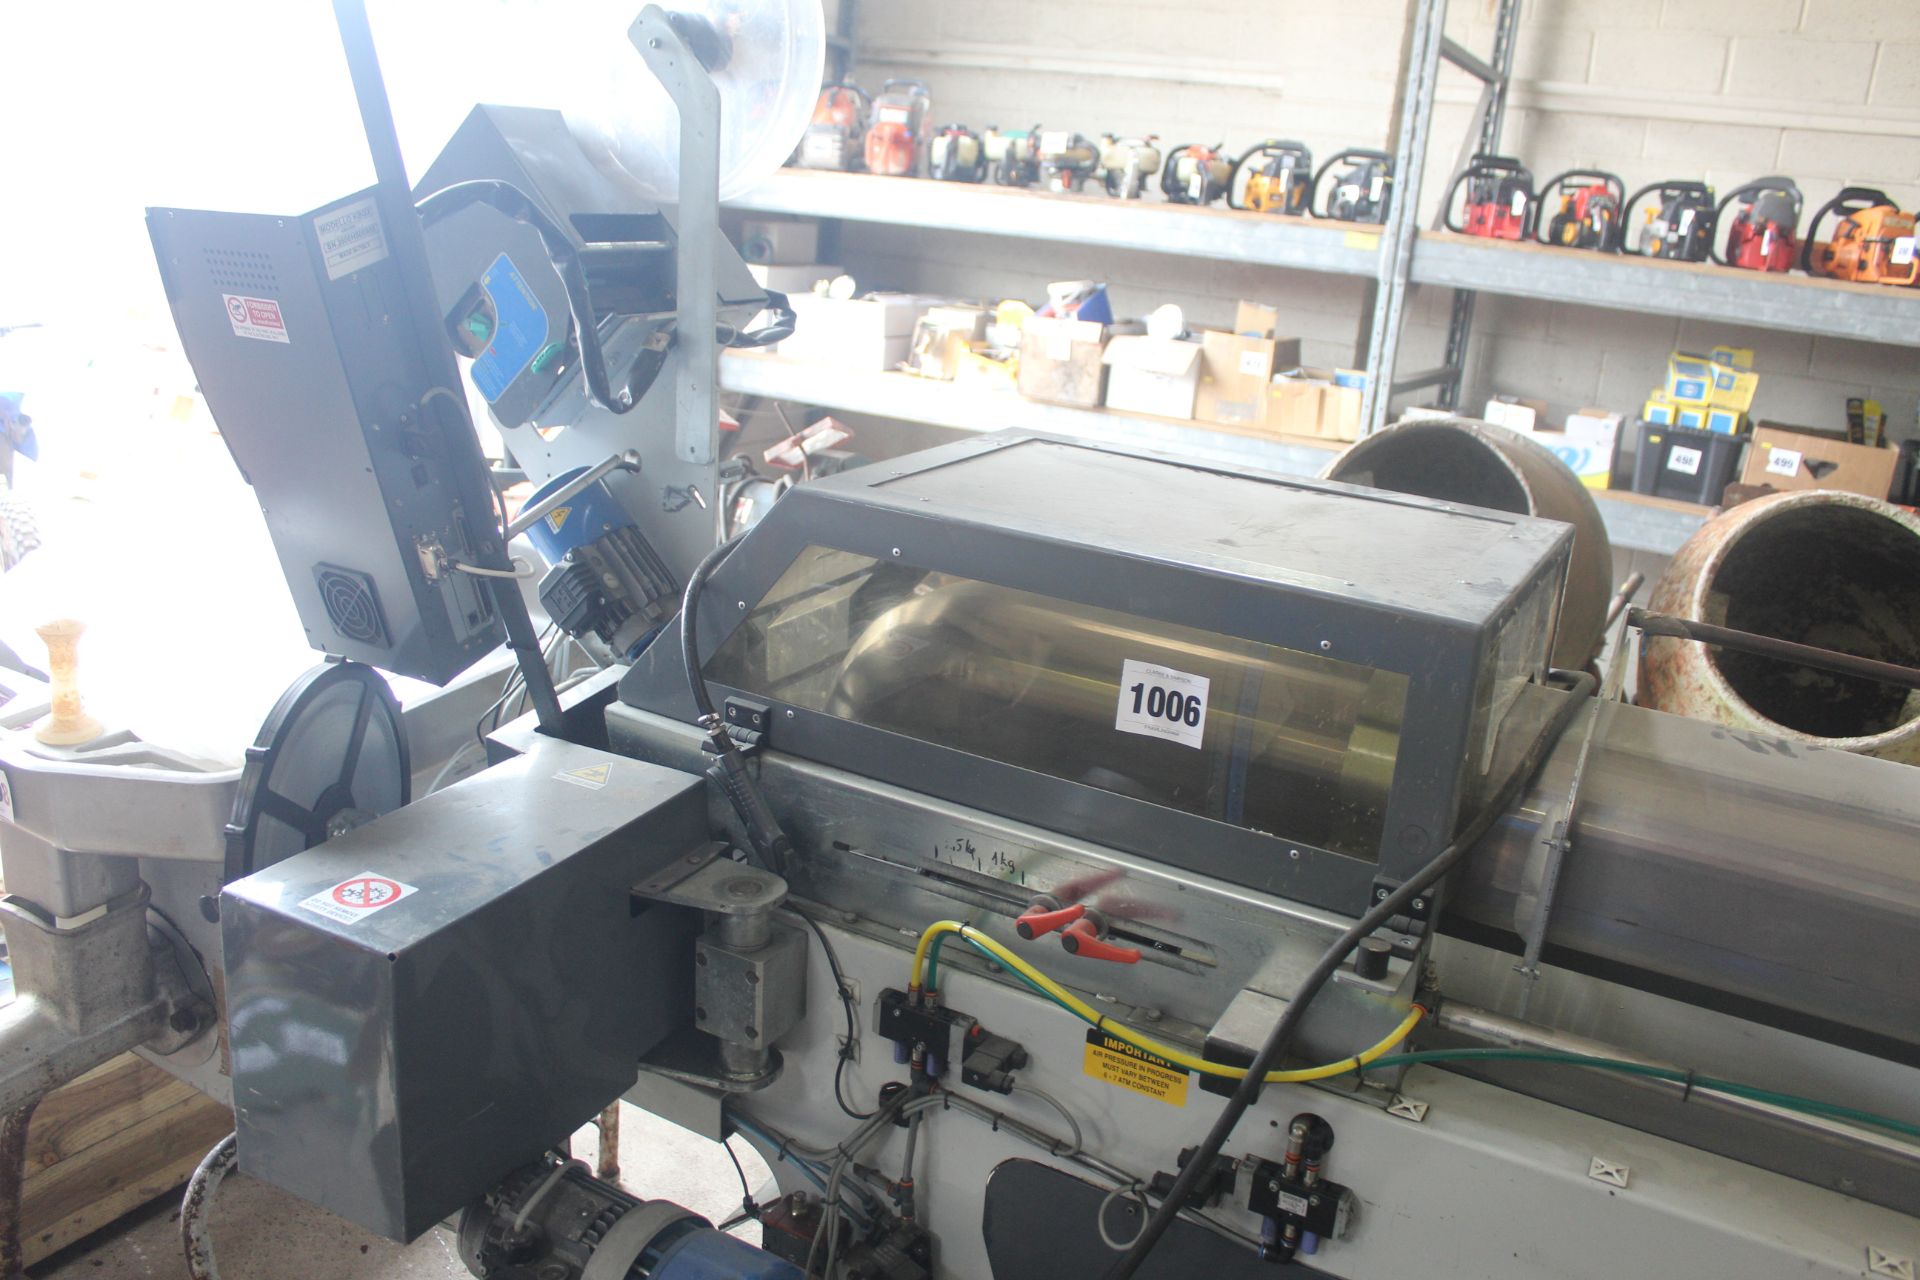 Sorma KB GX 140 produce netting machine. With label printer and output elevator. - Image 2 of 28